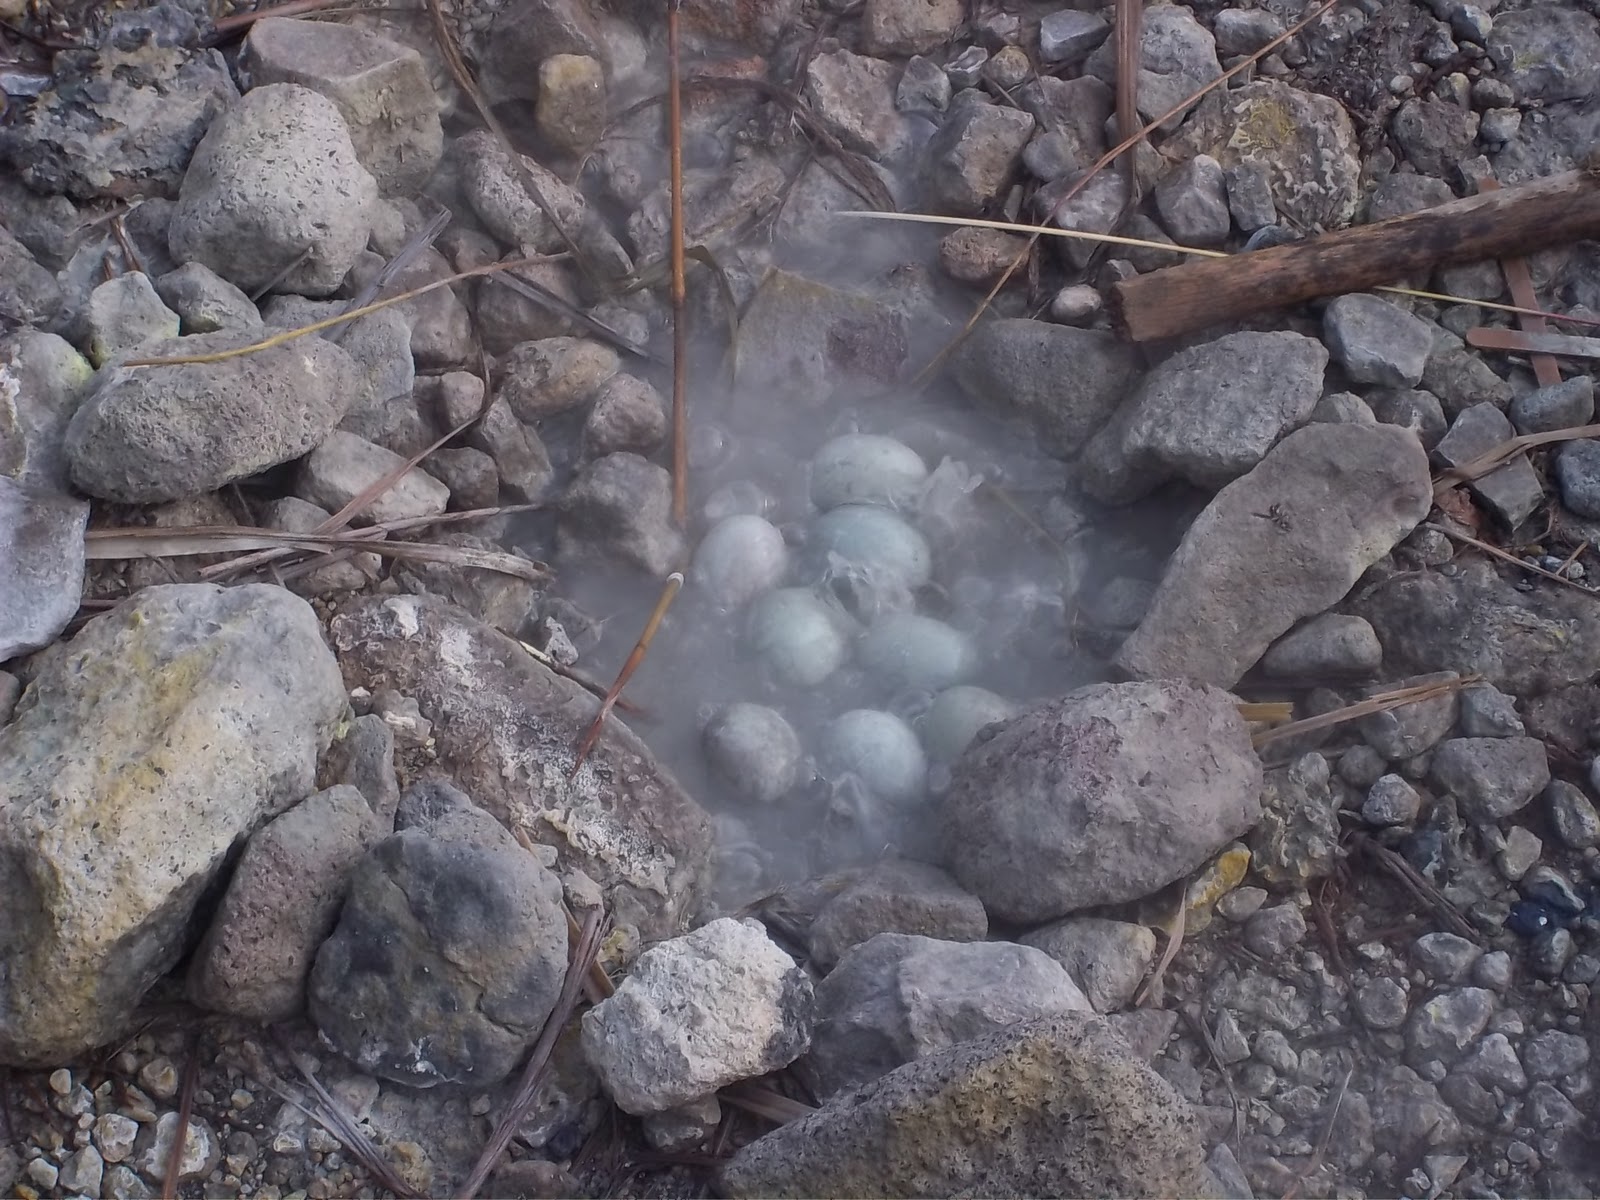 Eggs cooking in the natural fumaroles